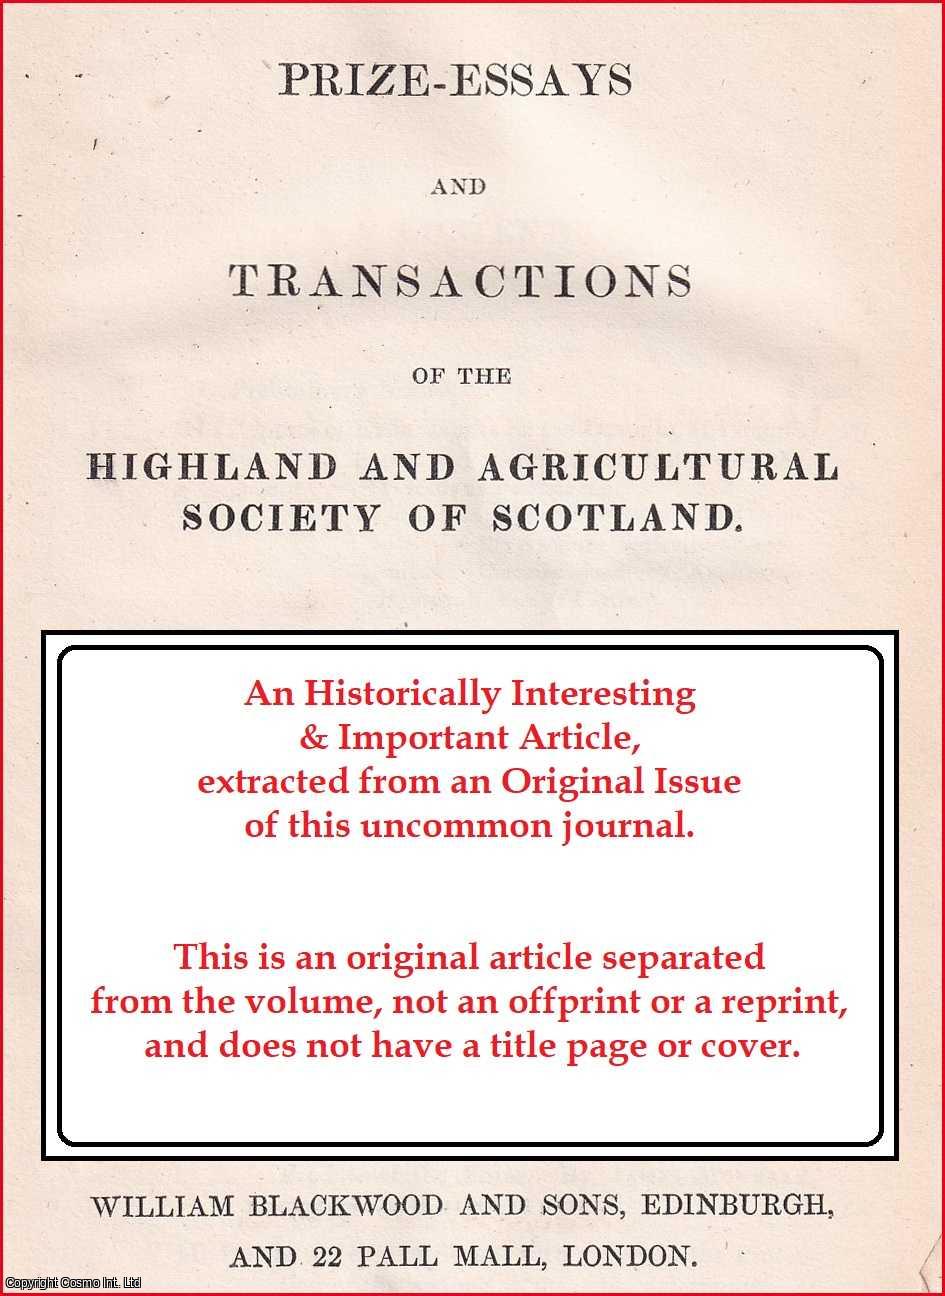 Alexander Anderson, Overseer, Ballimore House. - The Laying Down of a Field to Permanent pasture, the Property of Mungo N. Campbell, Esq. of Ballimore. An uncommon original article from the Prize Essays and Transactions of the Highland Society of Scotland, 1841.